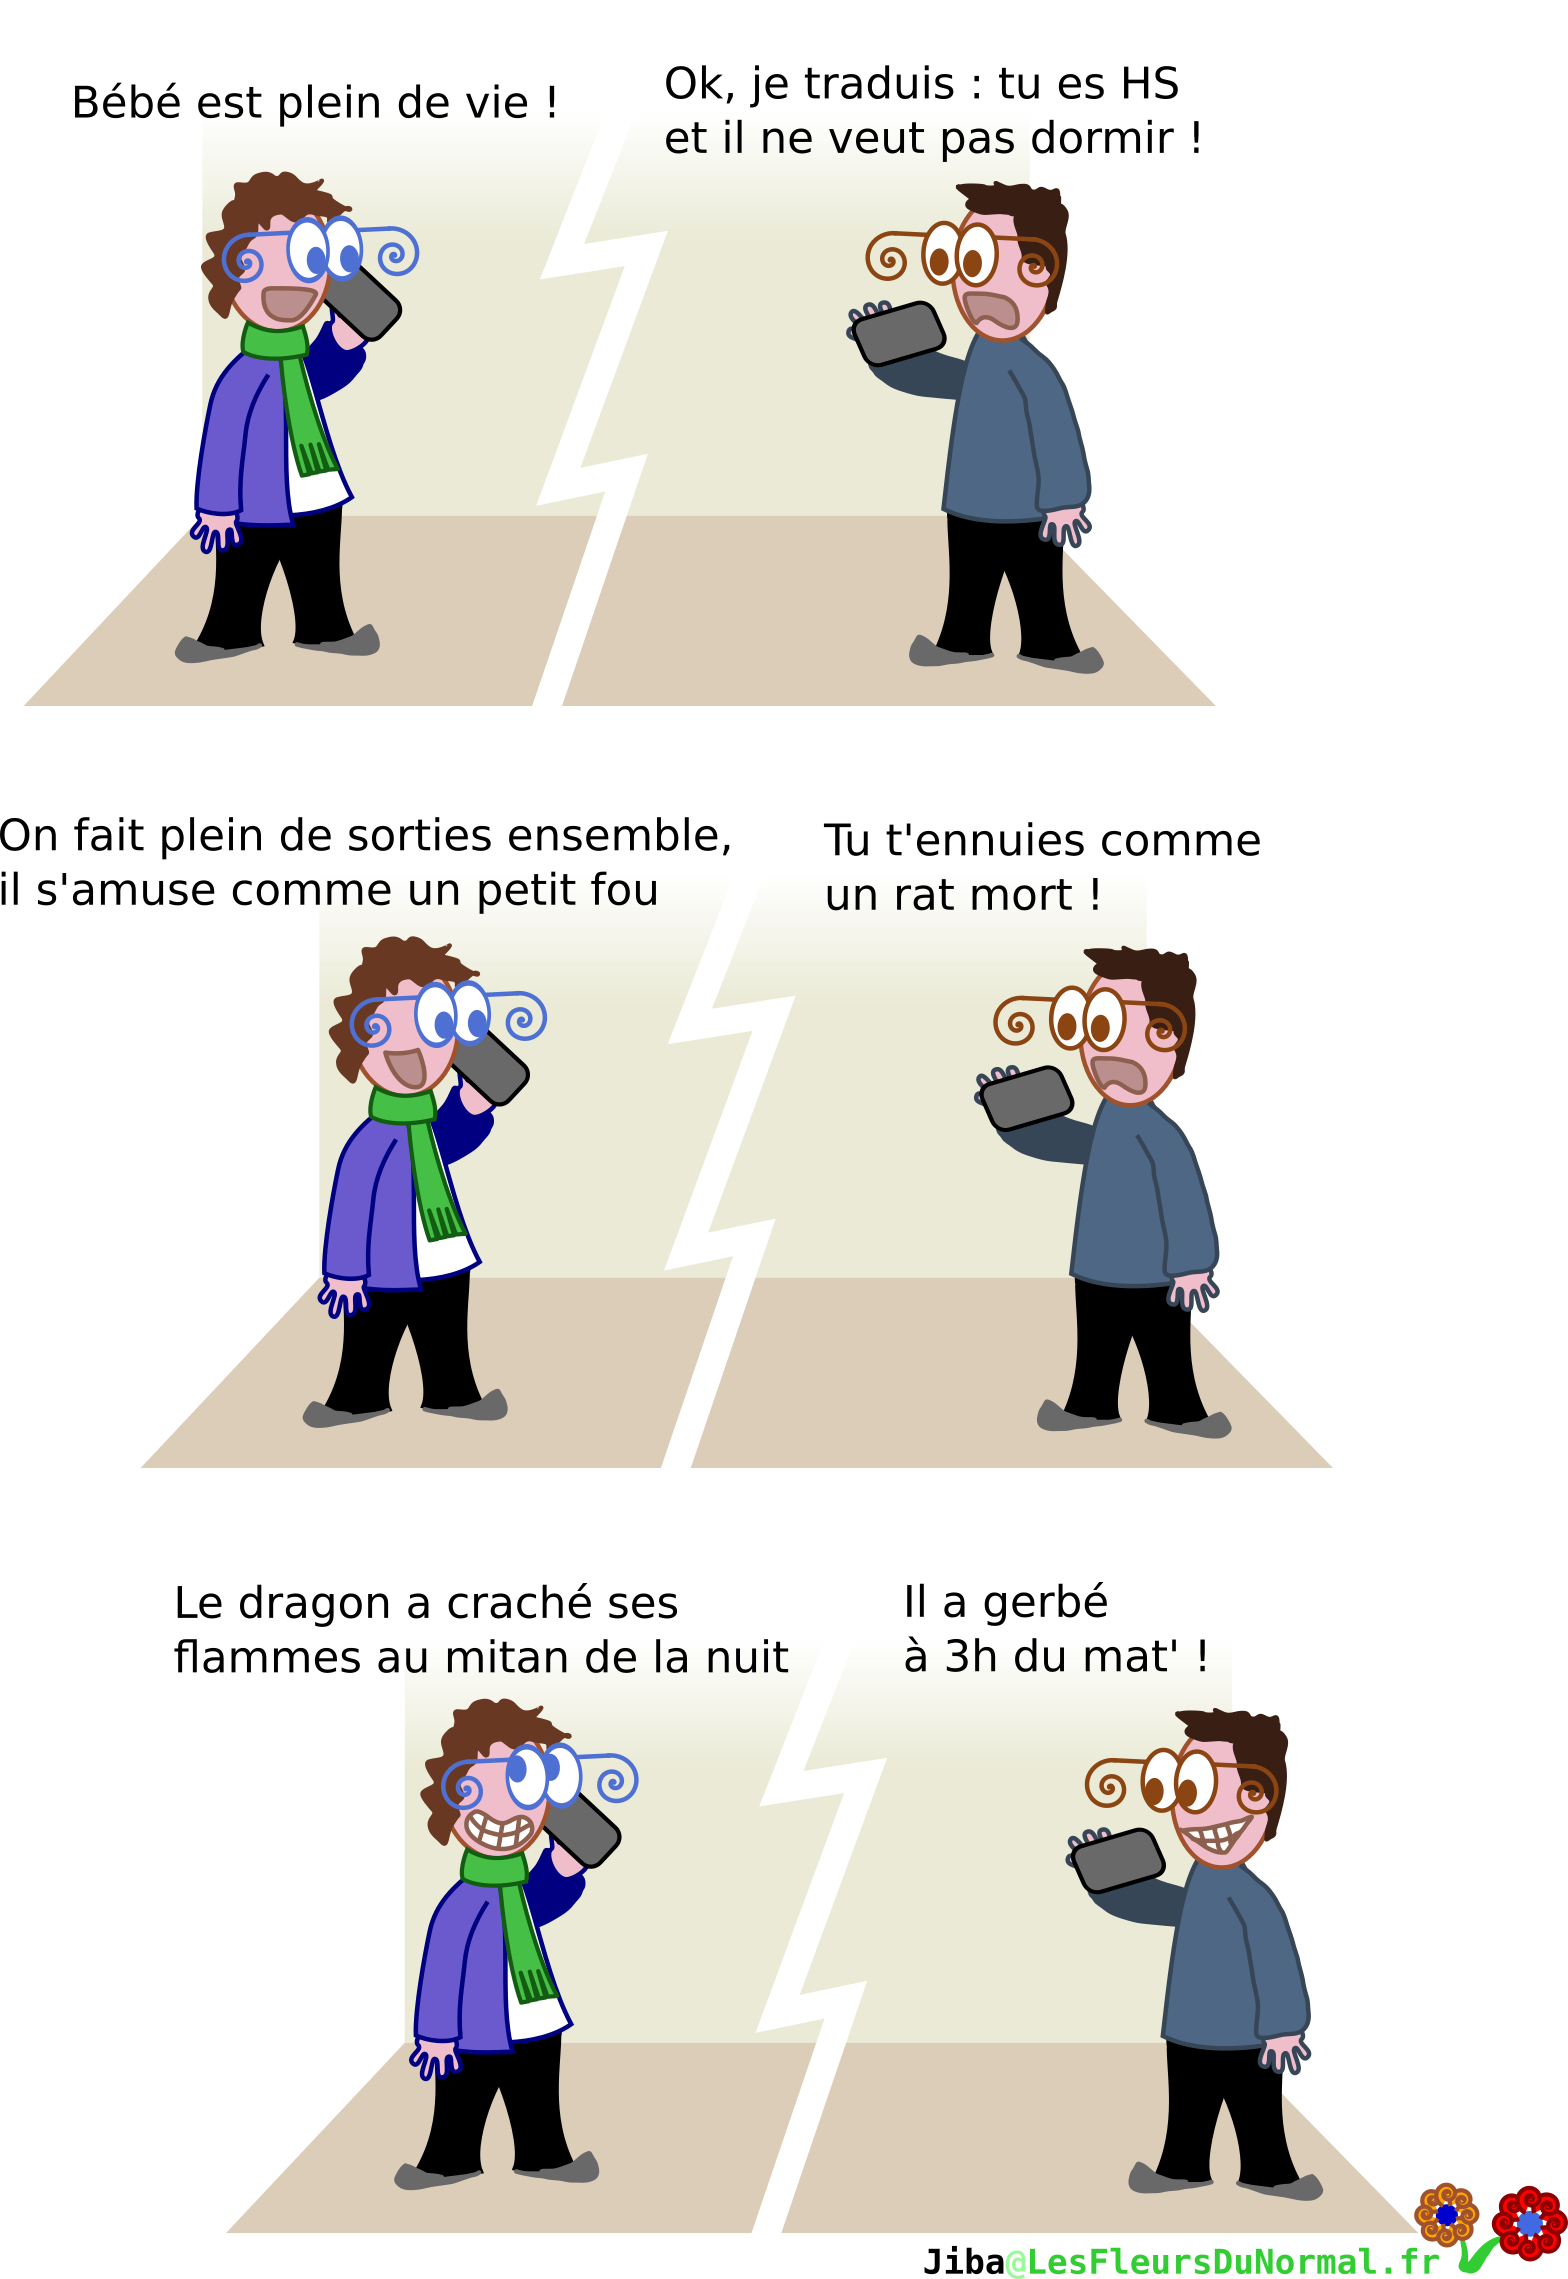 ../../_images/traduction.png